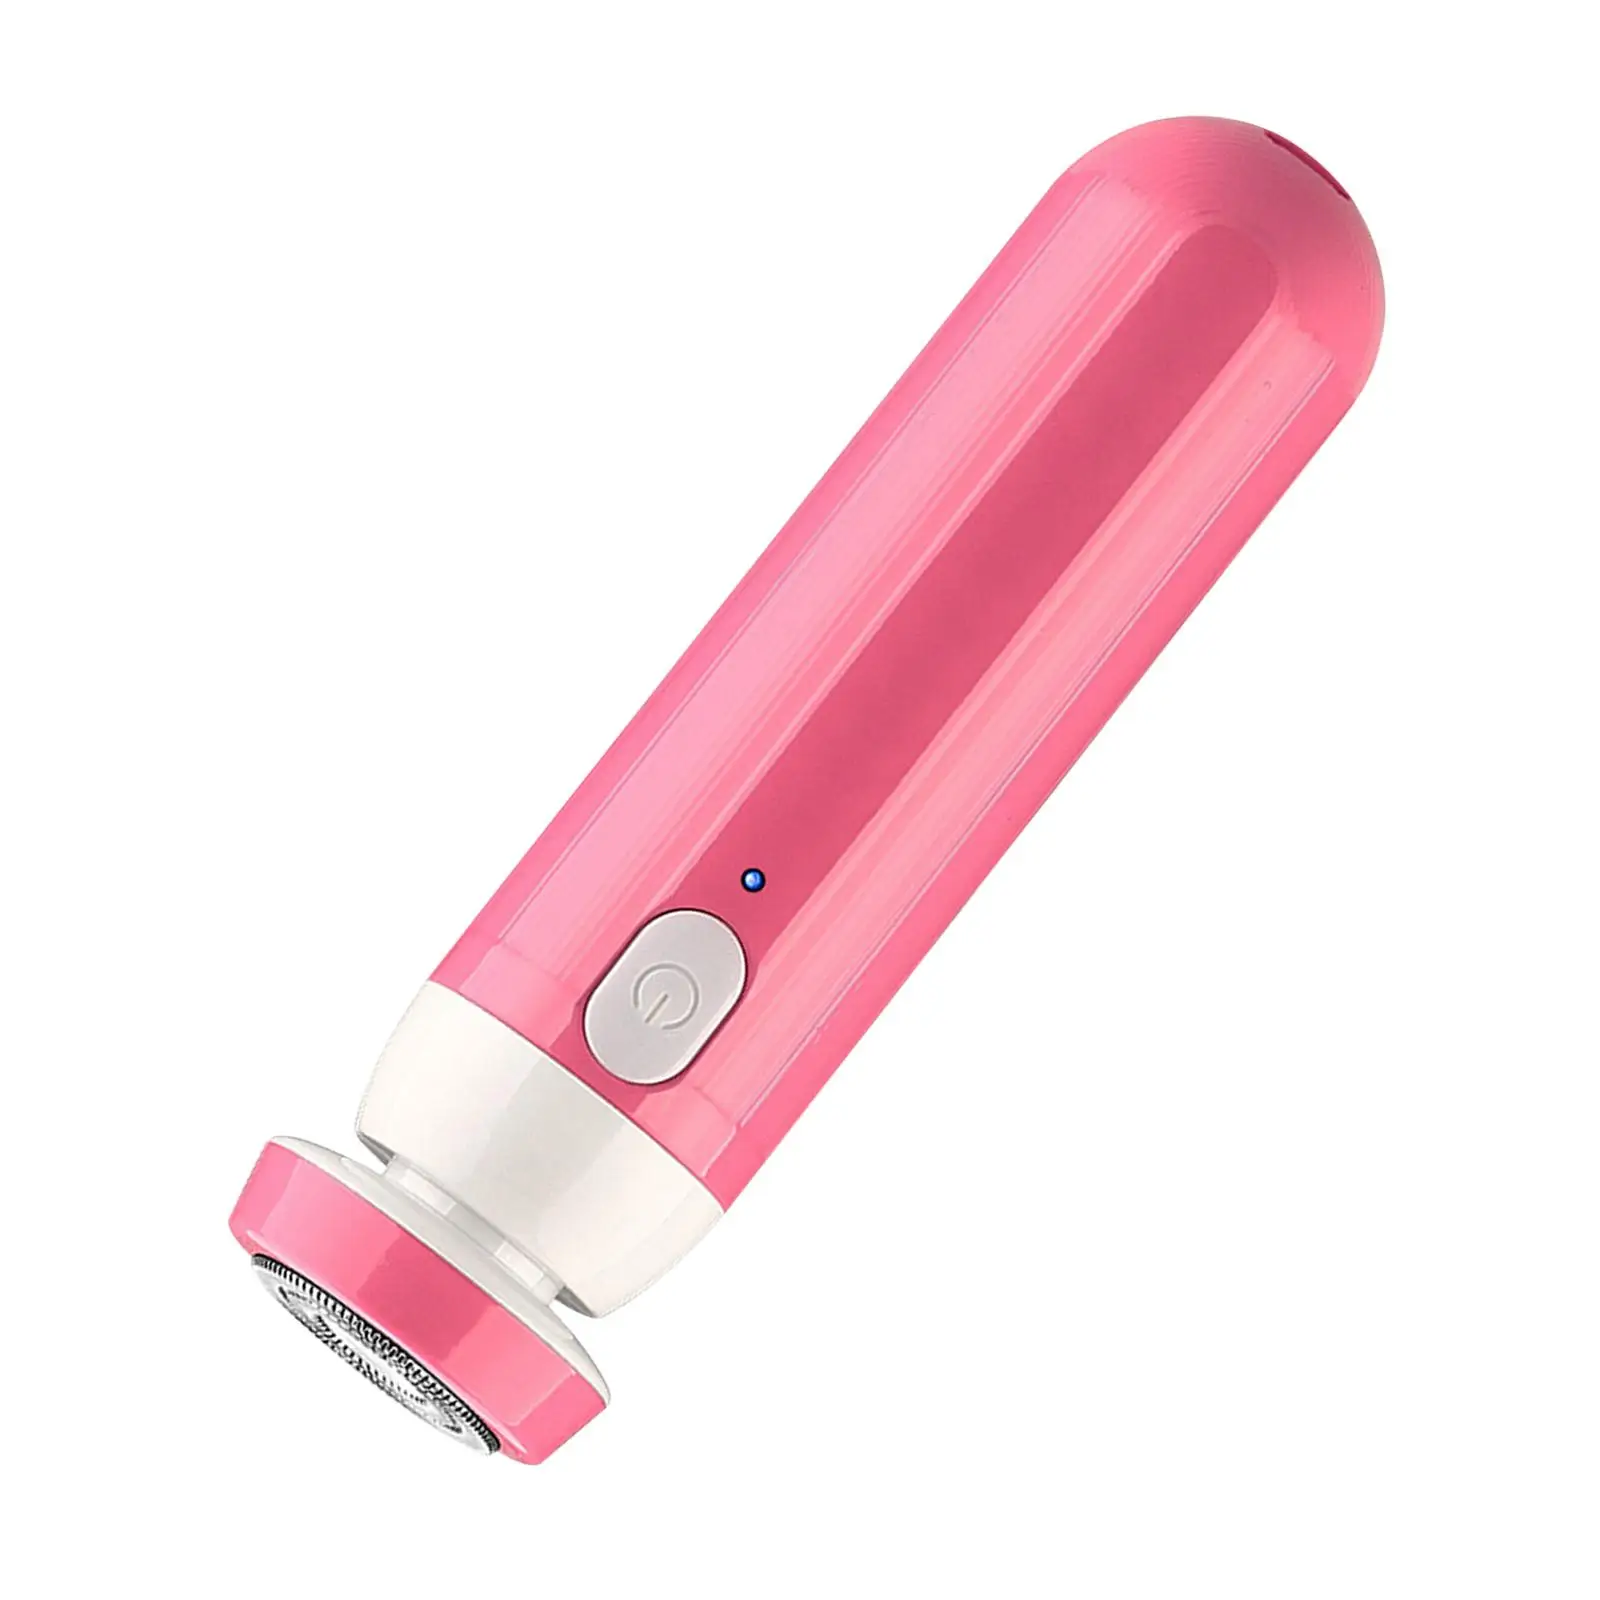 

Compact Travel Electric Shaver Shaving Machine Hair Remover Washable Head Turbine Rotating Blade Rotary Razor Wet & Dry Use Pink